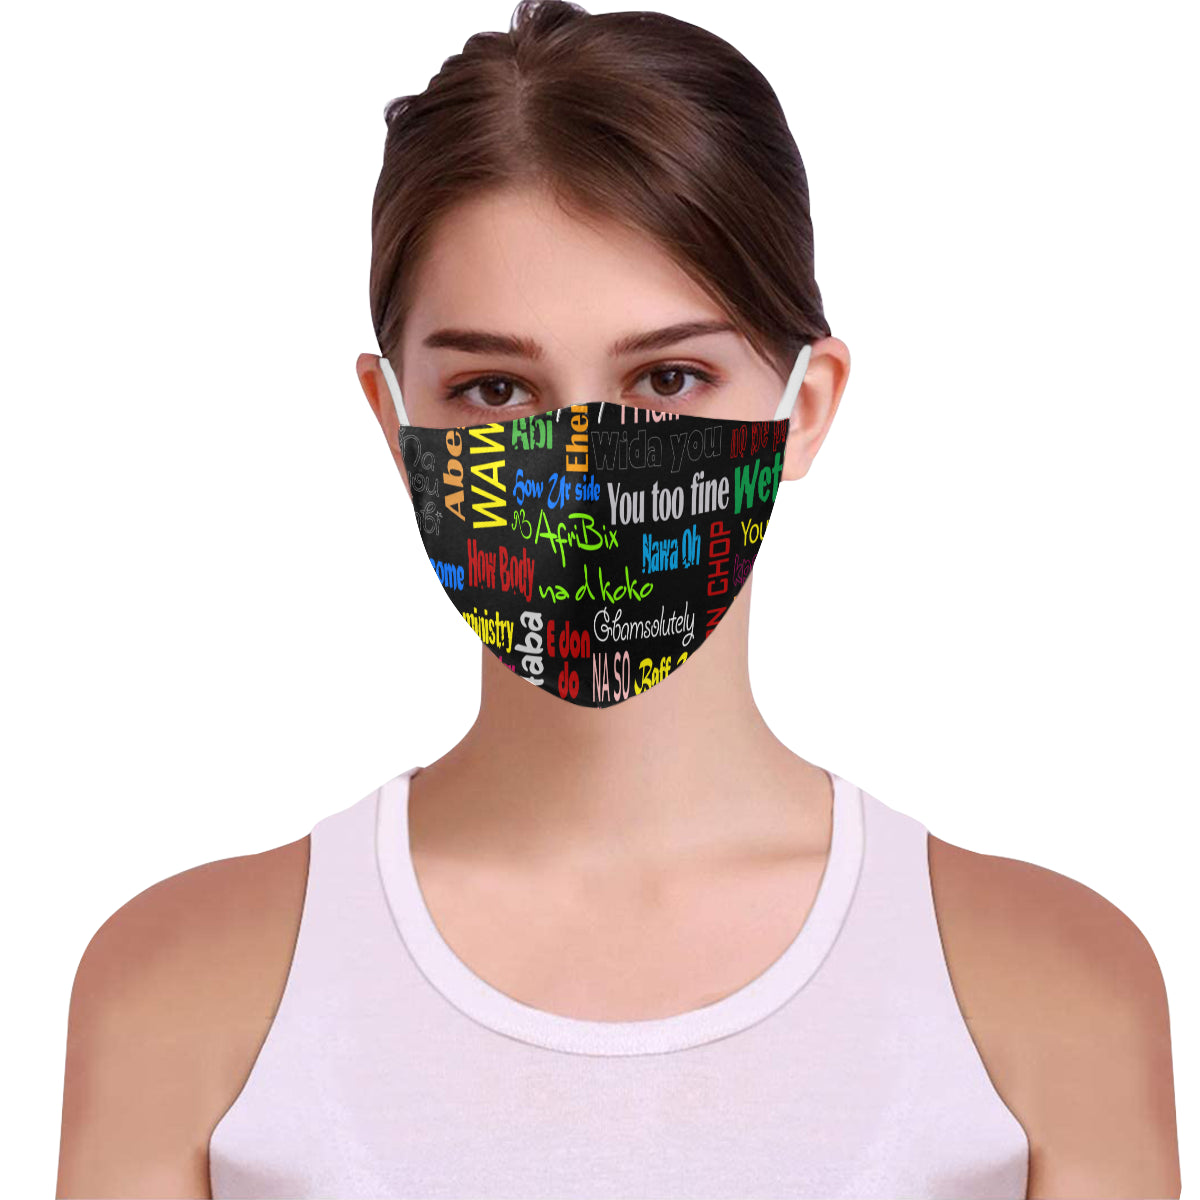 AfriBix Pidgin Print Cotton Fabric Face Mask with Filter Slot & Adjustable Strap - Non-medical use (Pack of 5)